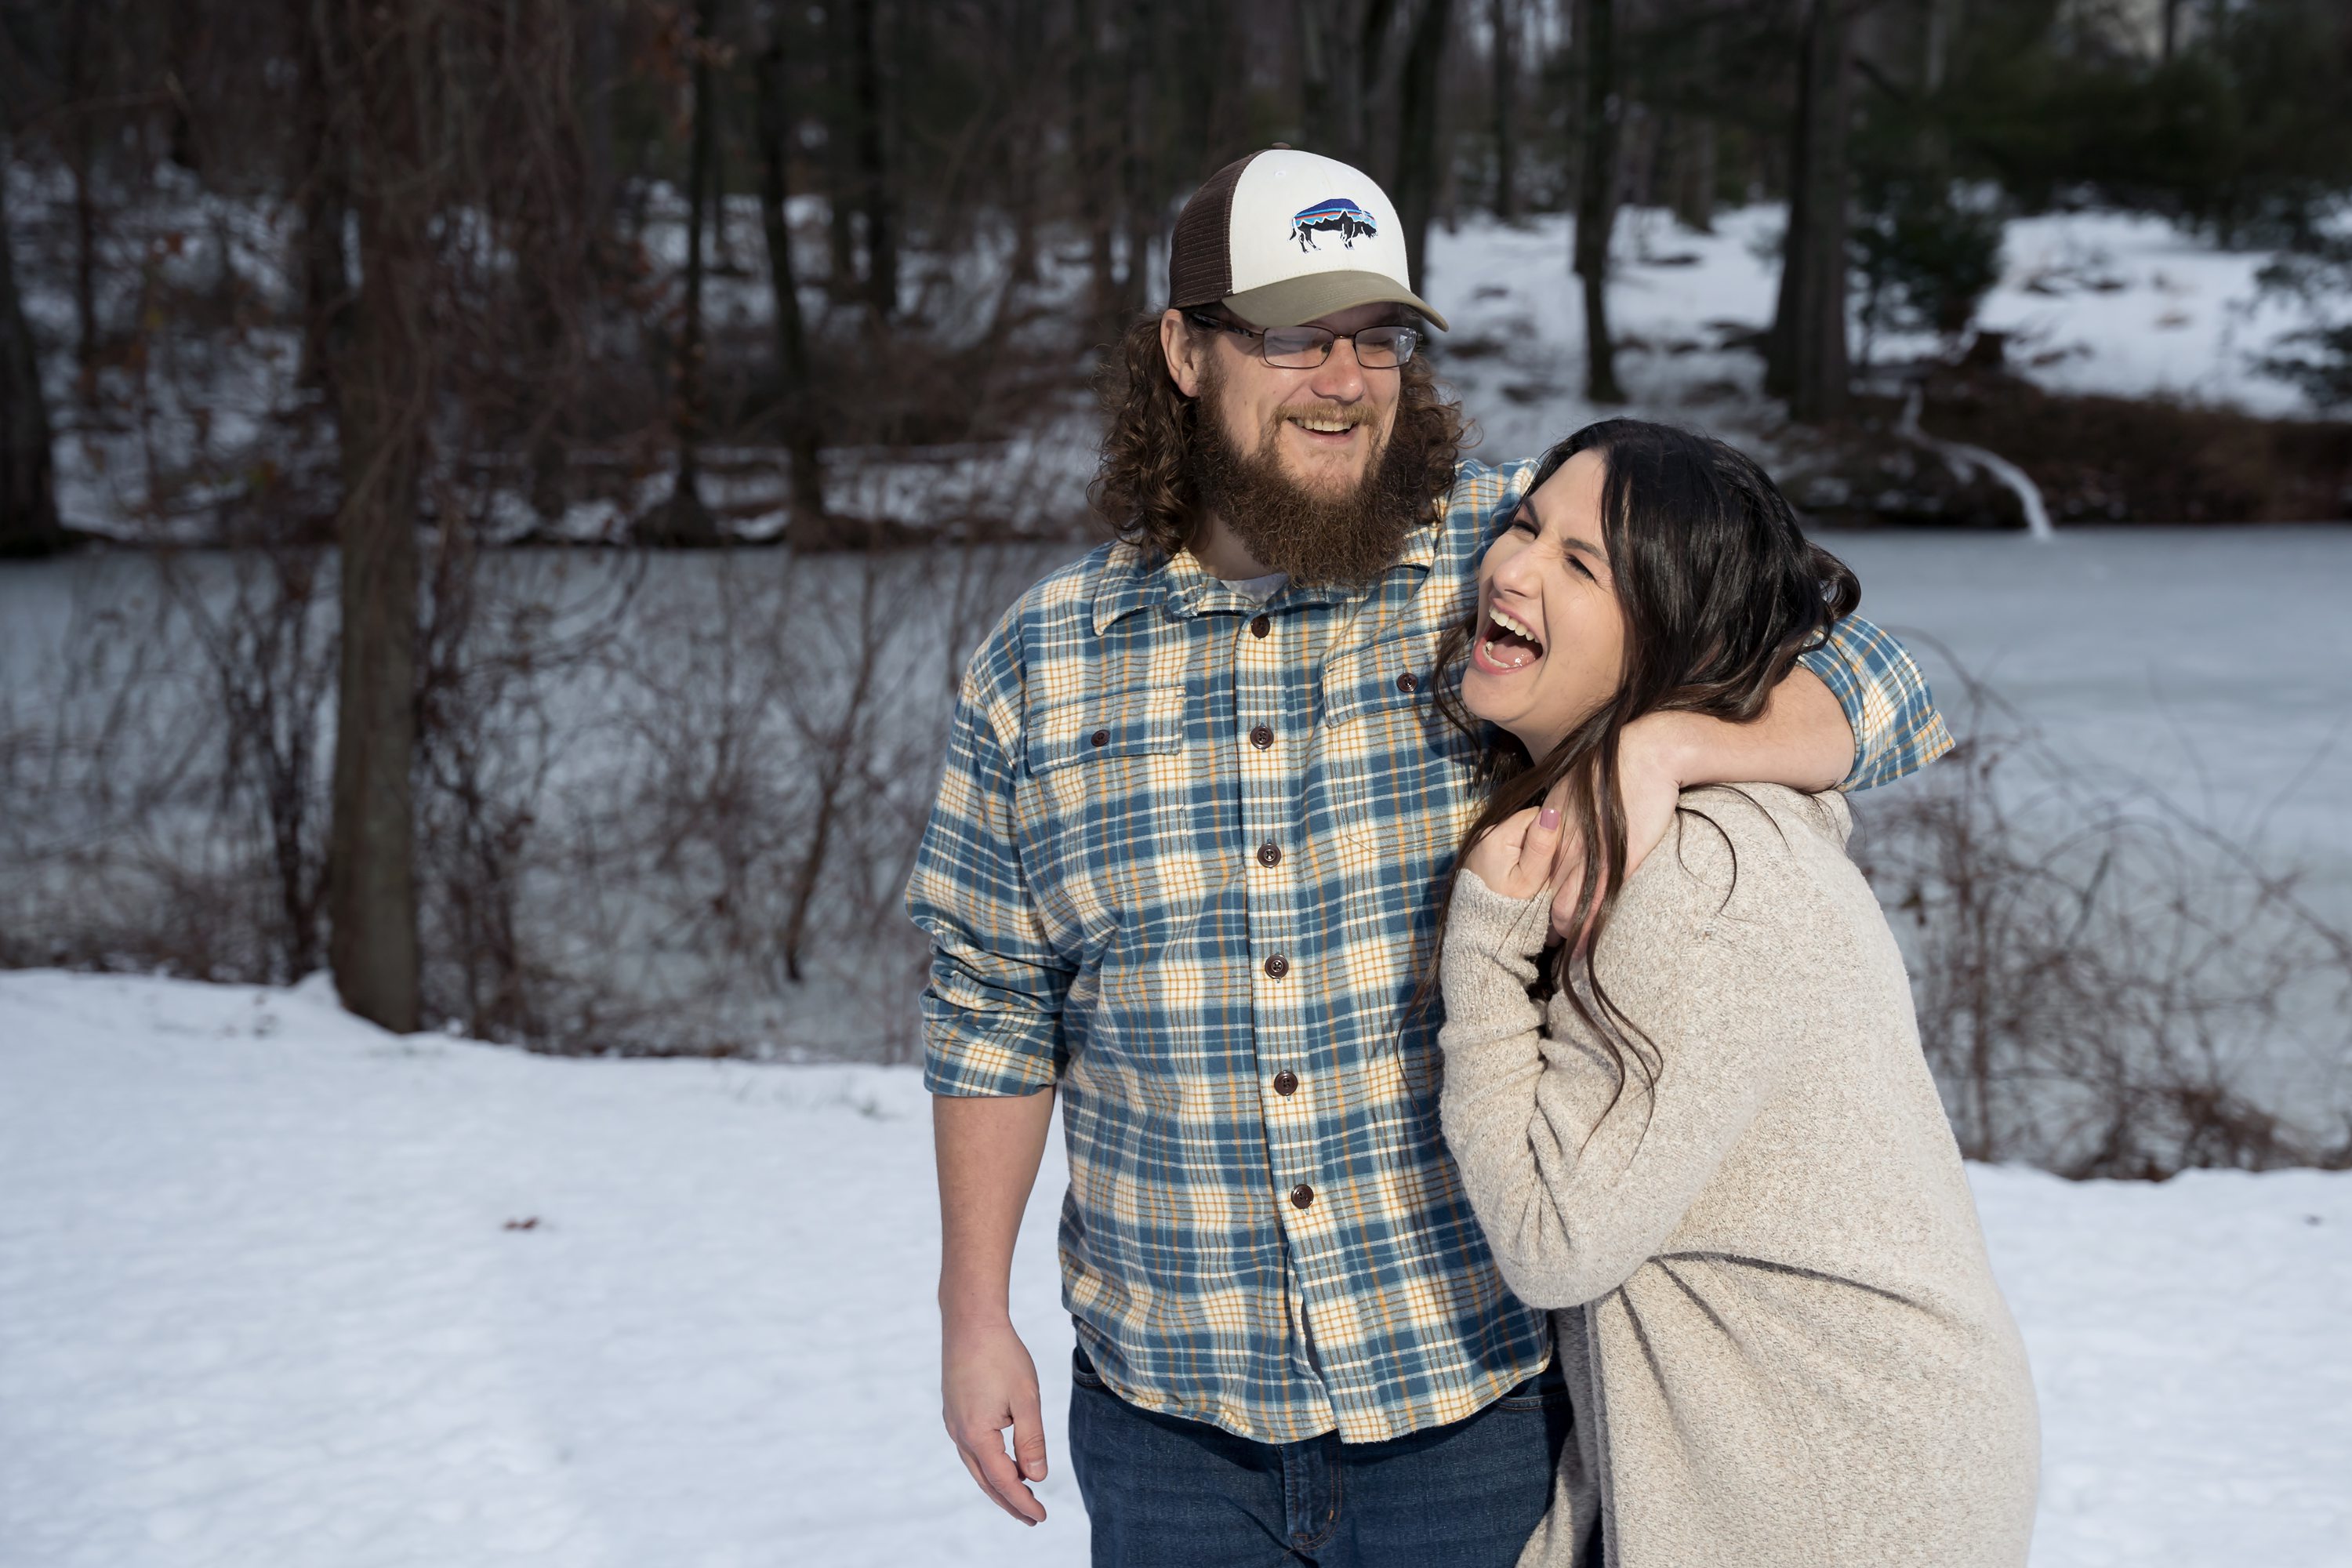 Cape Cod Wedding Photographer,Norton Photographer,Engagement Session by a Pond,Winter Engagement Session,TerryDiddle Farm Wedding,Rehoboth Wedding Photographer